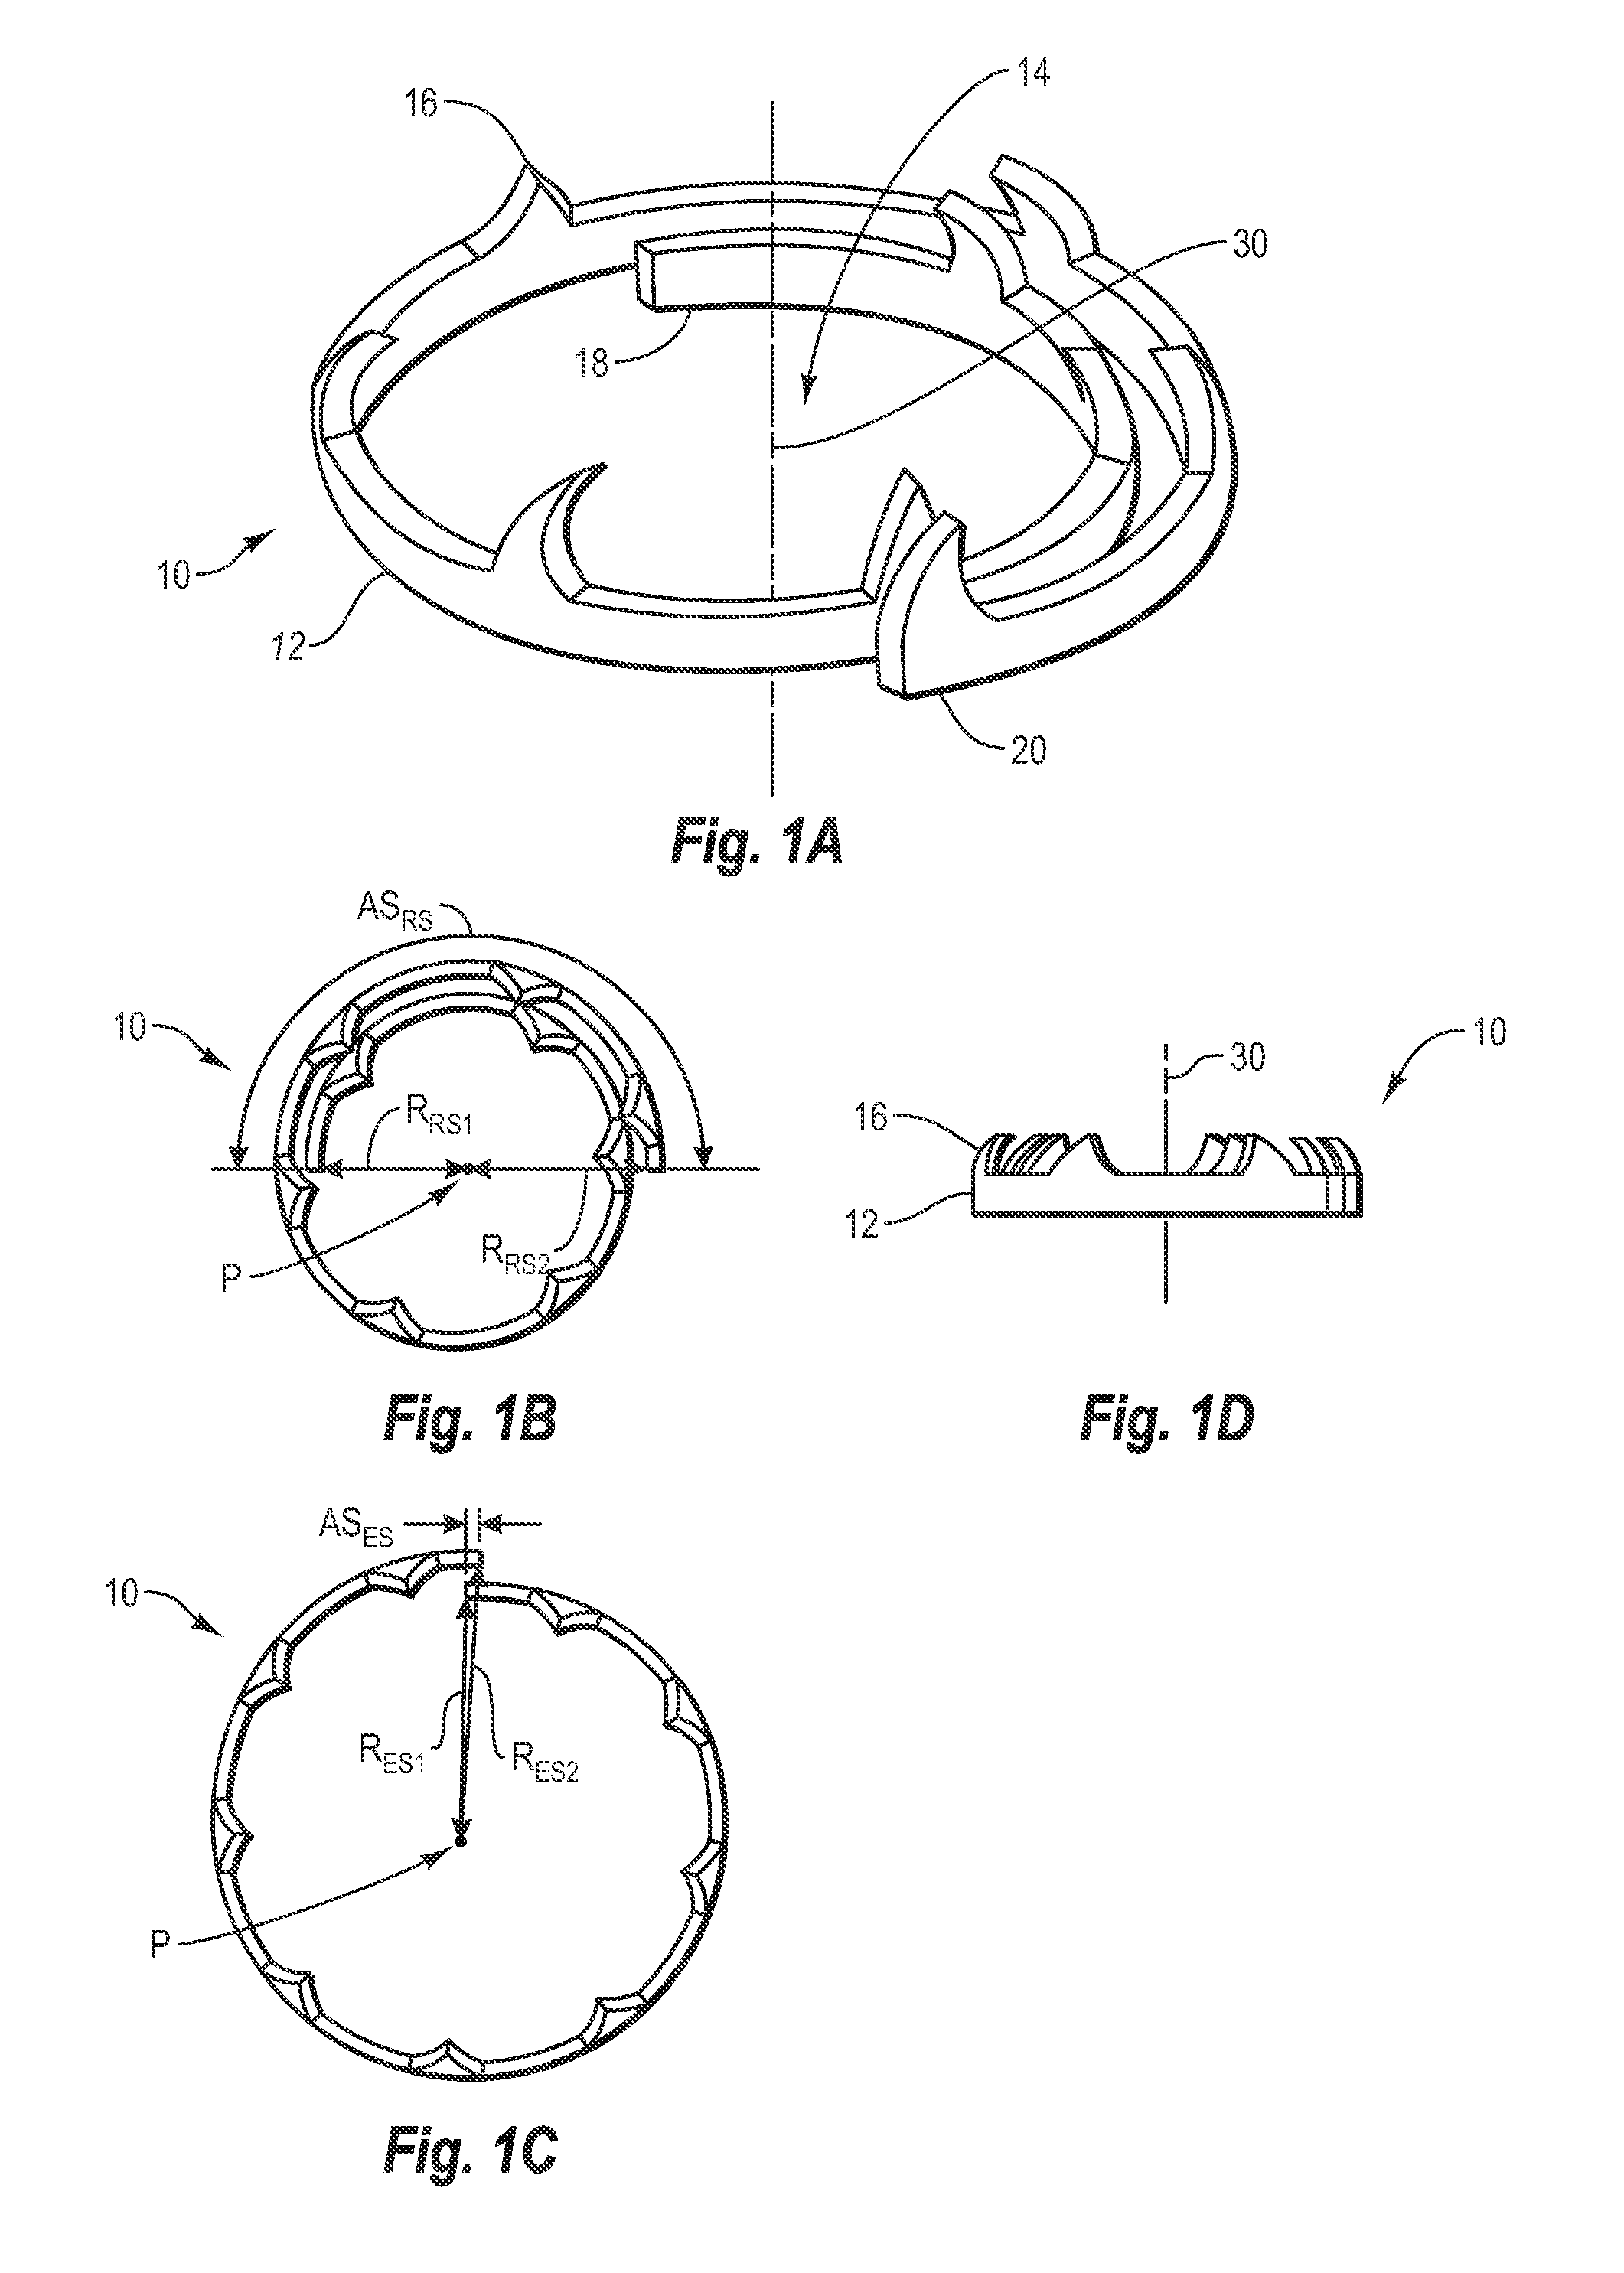 Tissue closure system and methods of use